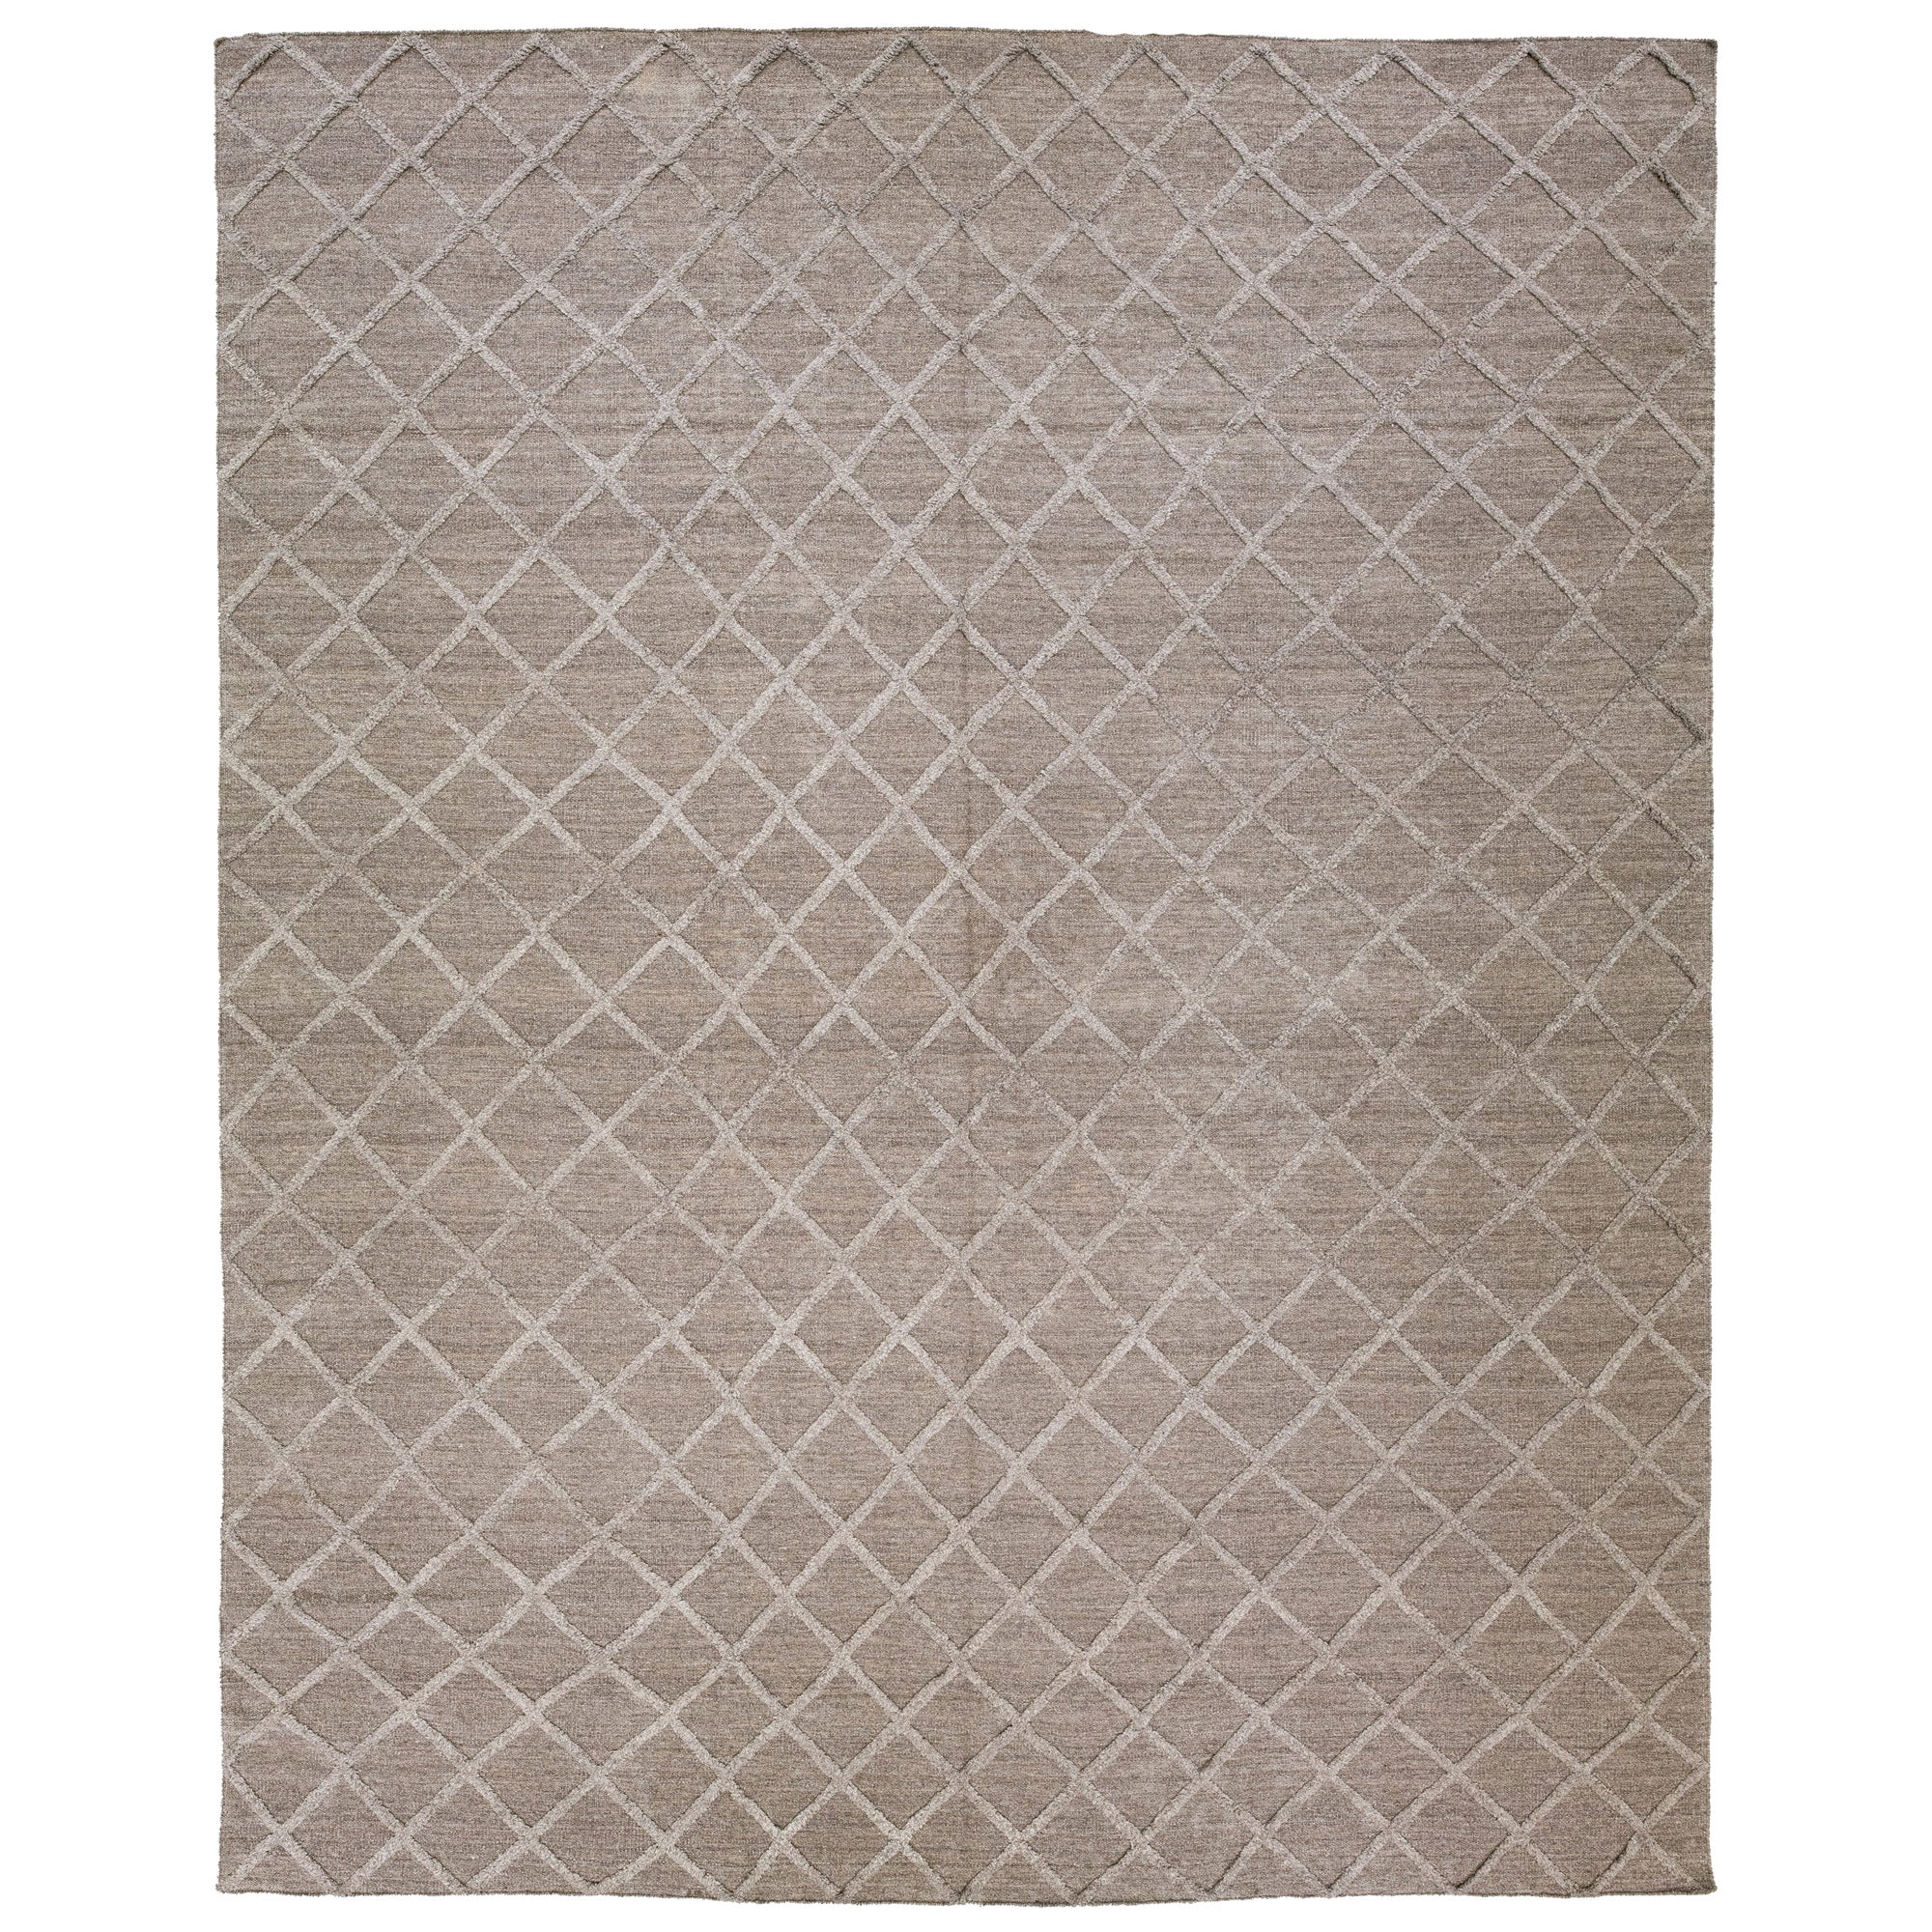 High-Low Contemporary Flaweave Kilim Wool Rug With Trellis Design In Brown